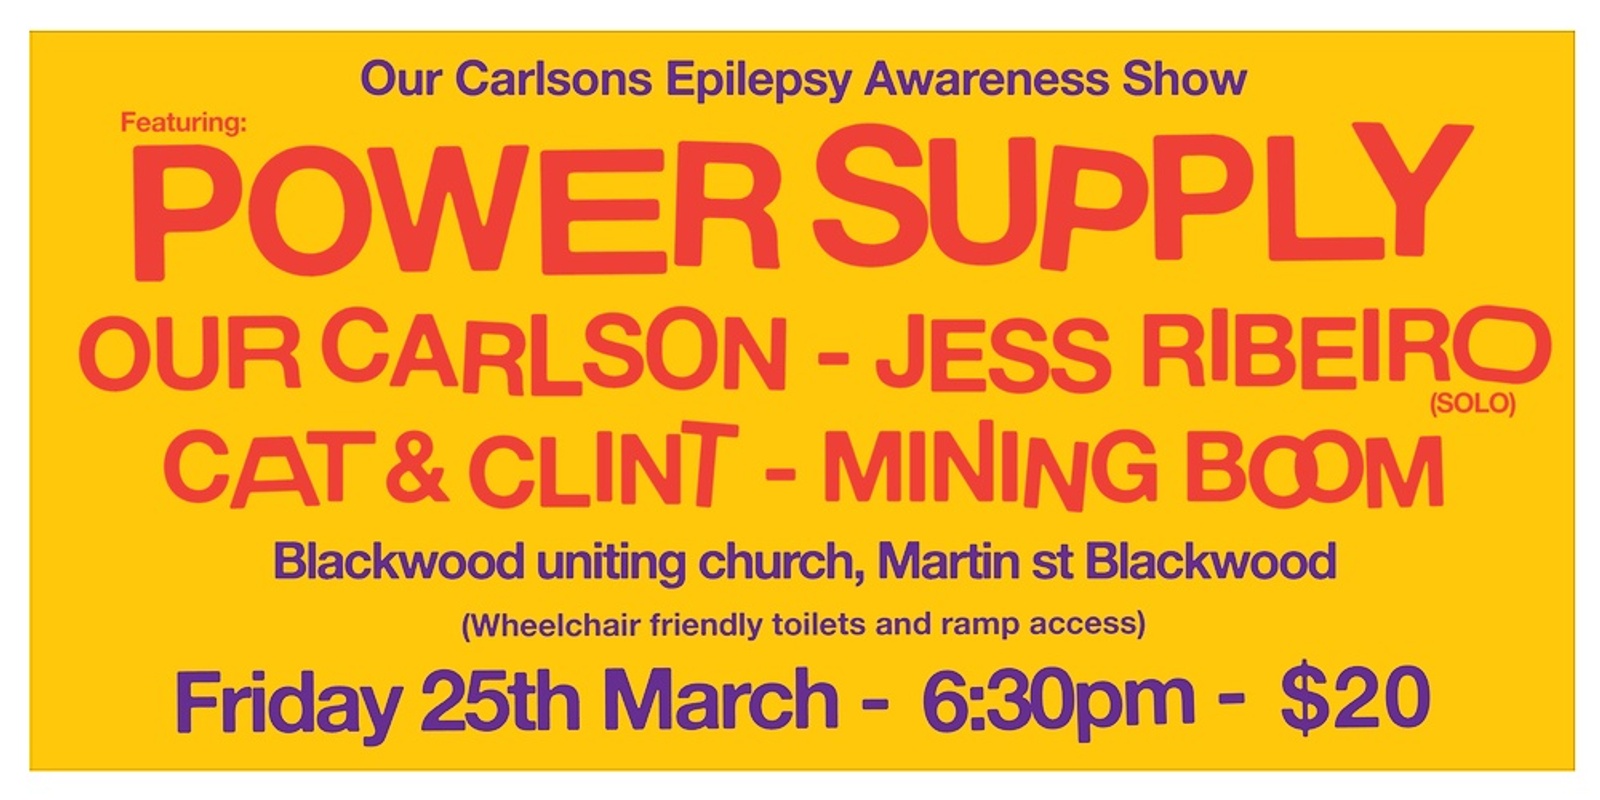 Banner image for Our Carlson's Epilepsy Awareness Show